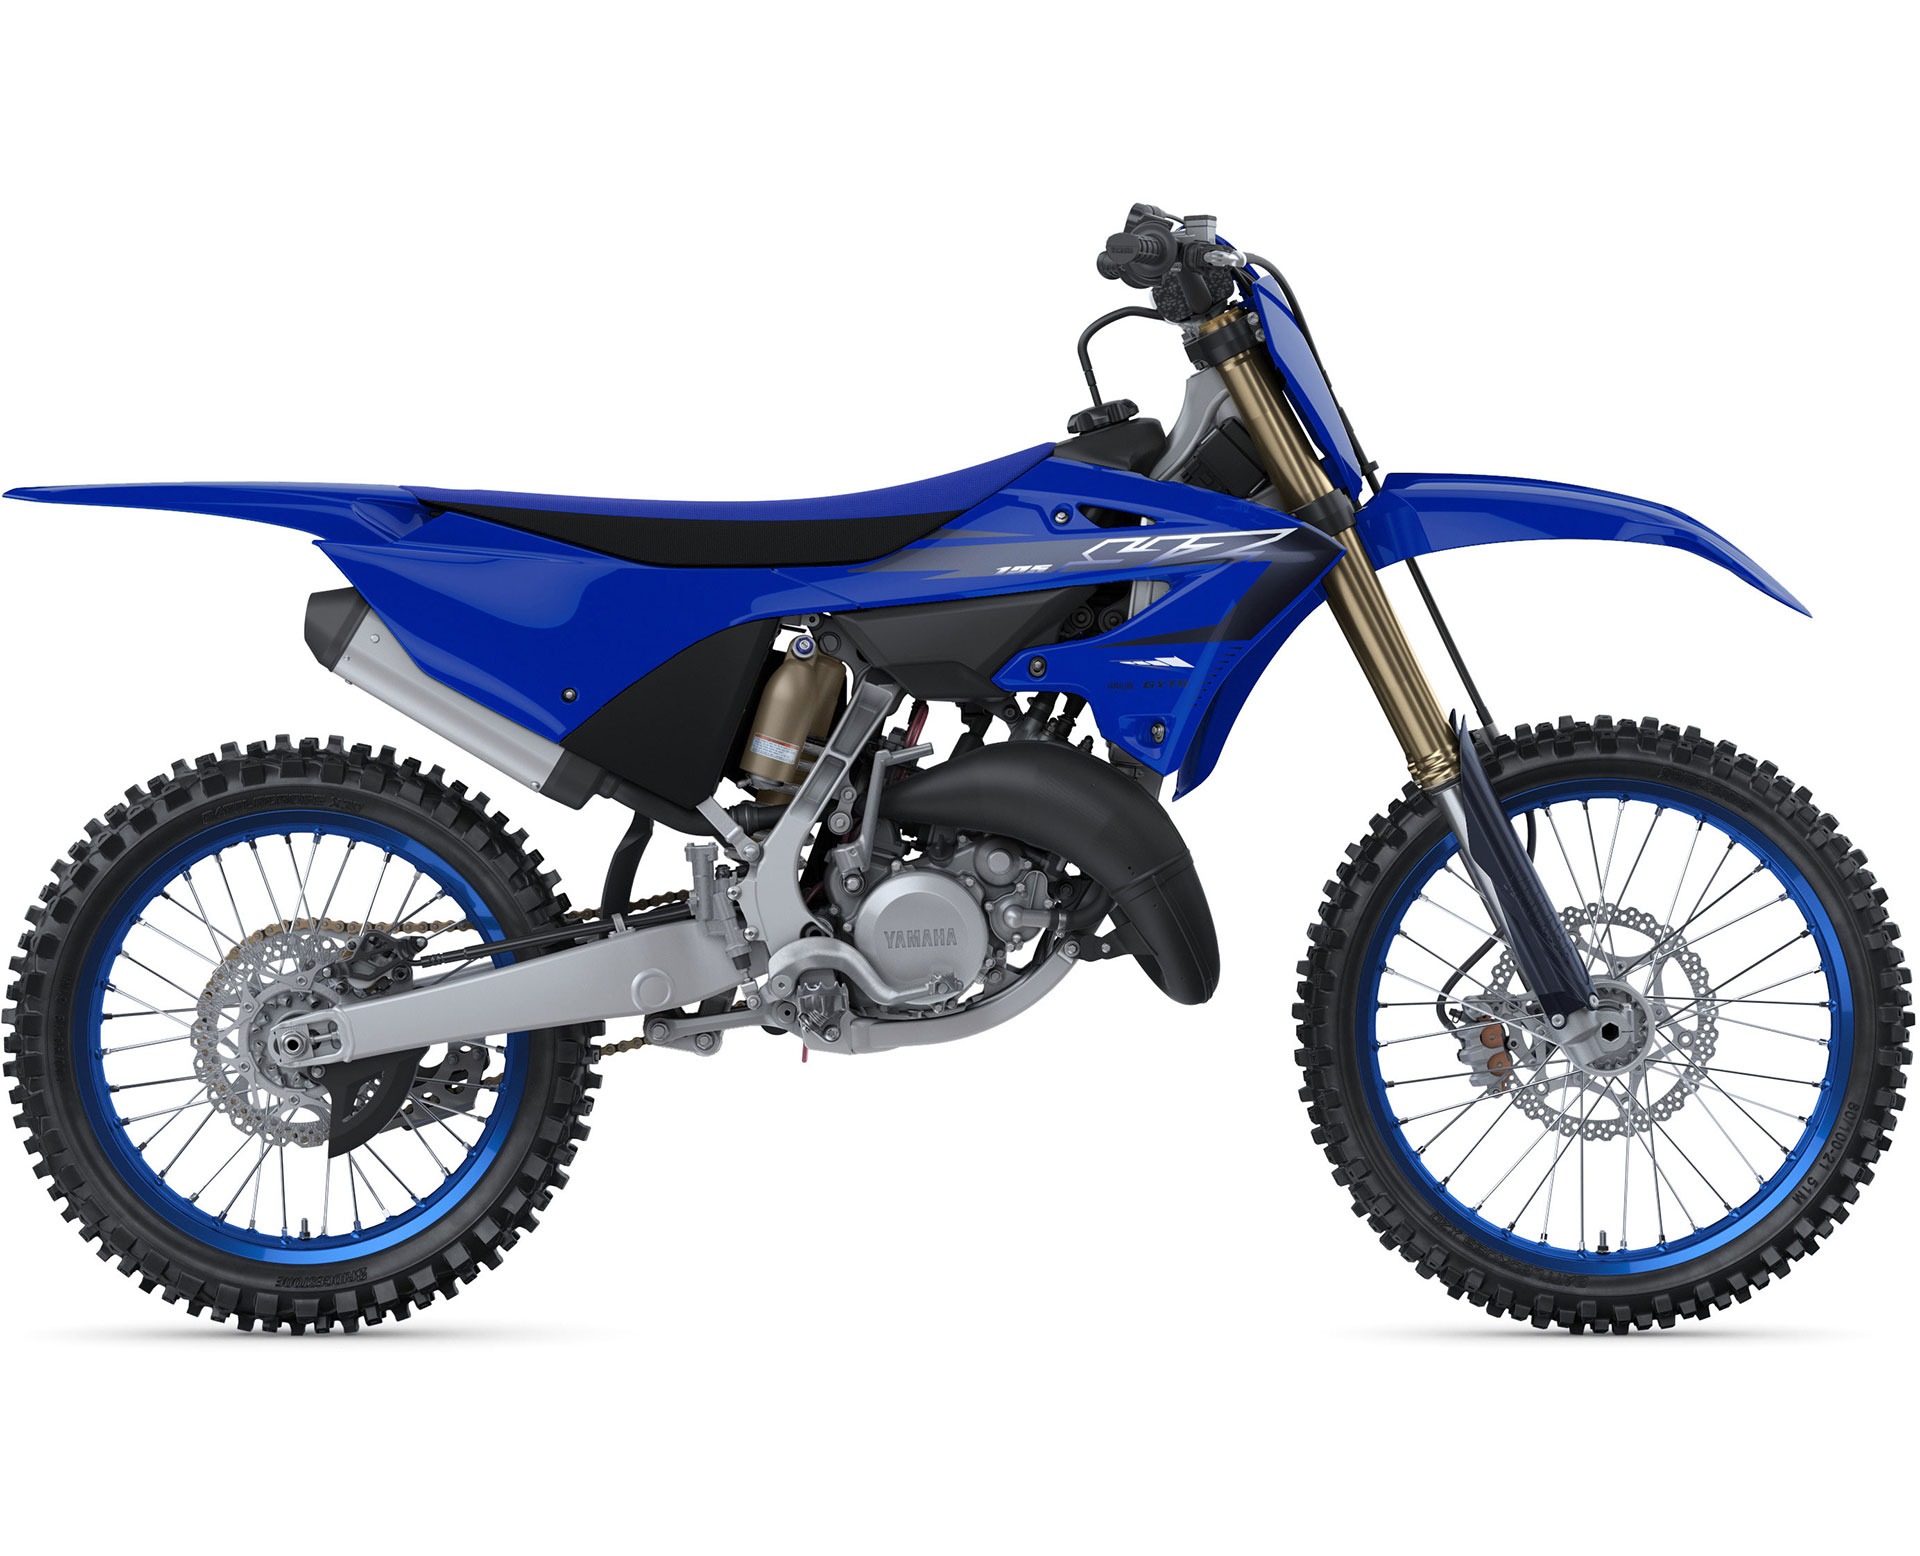 Thumbnail of your customized 2023 YZ125